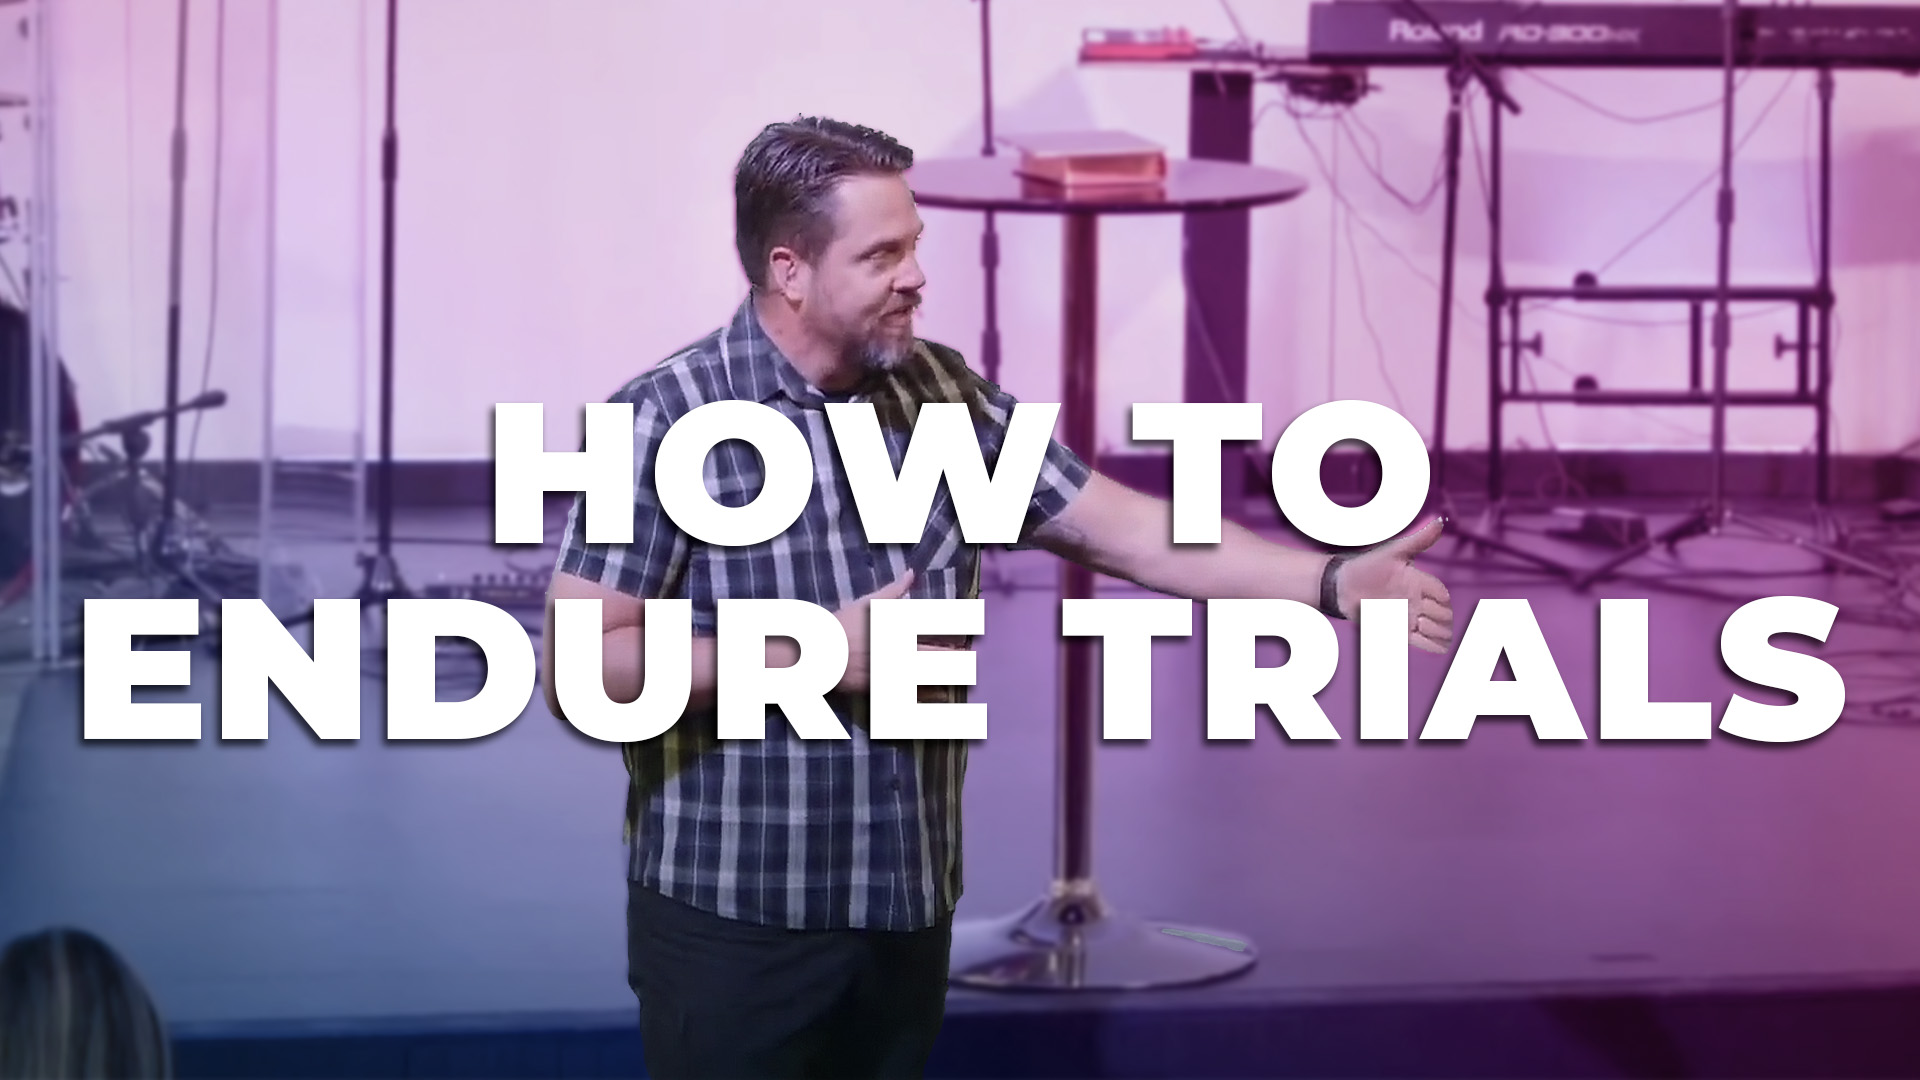 Featured image for “How to Endure Trials”